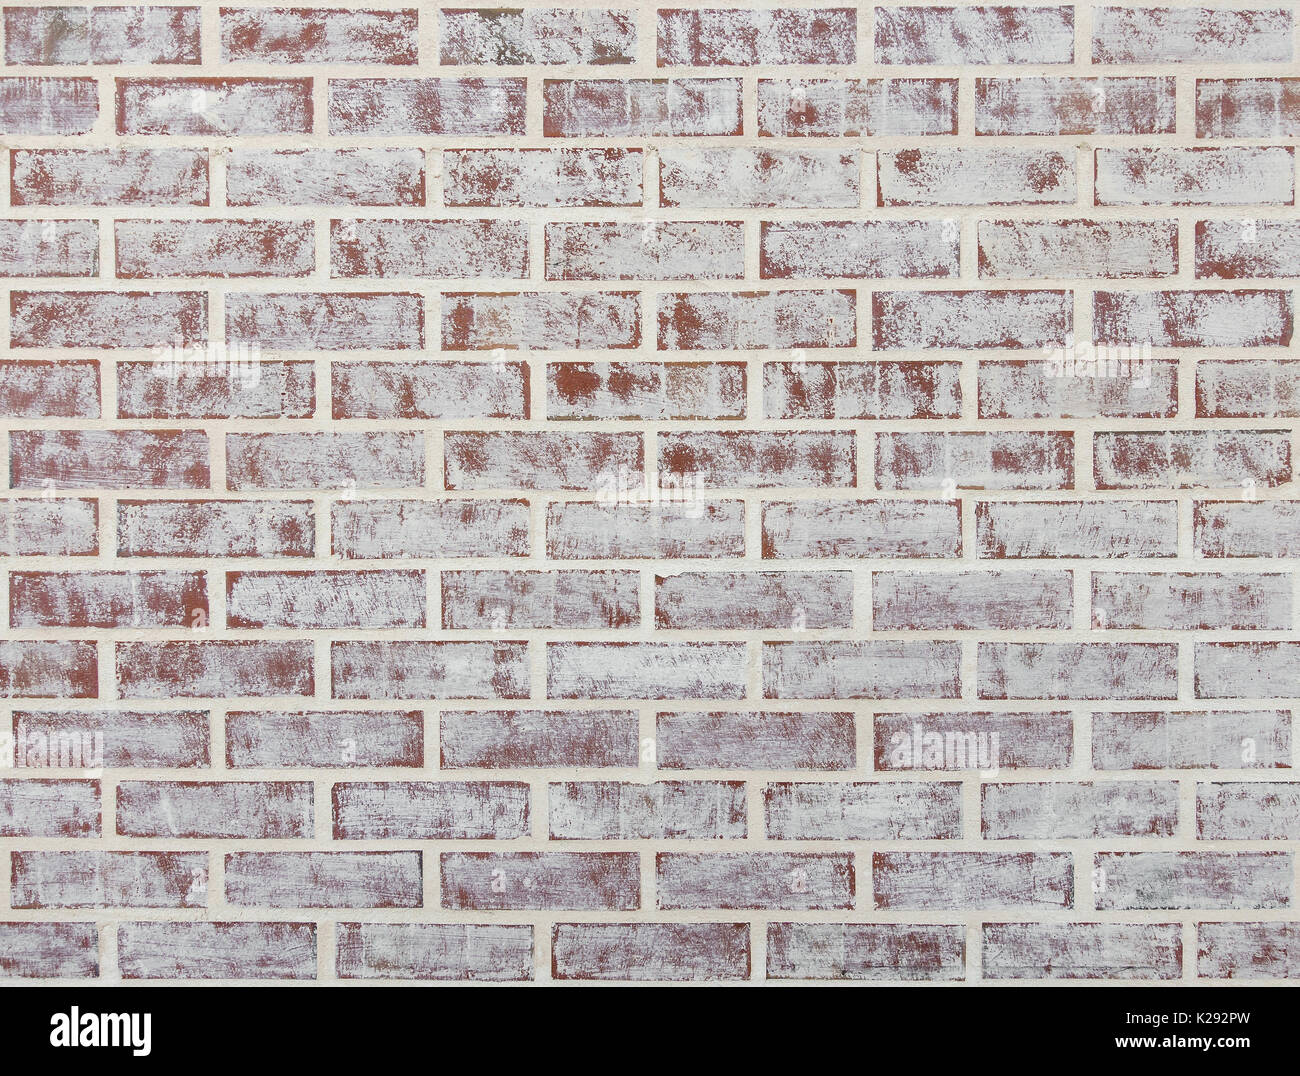 Whitewashed brick wall texture or background Stock Photo